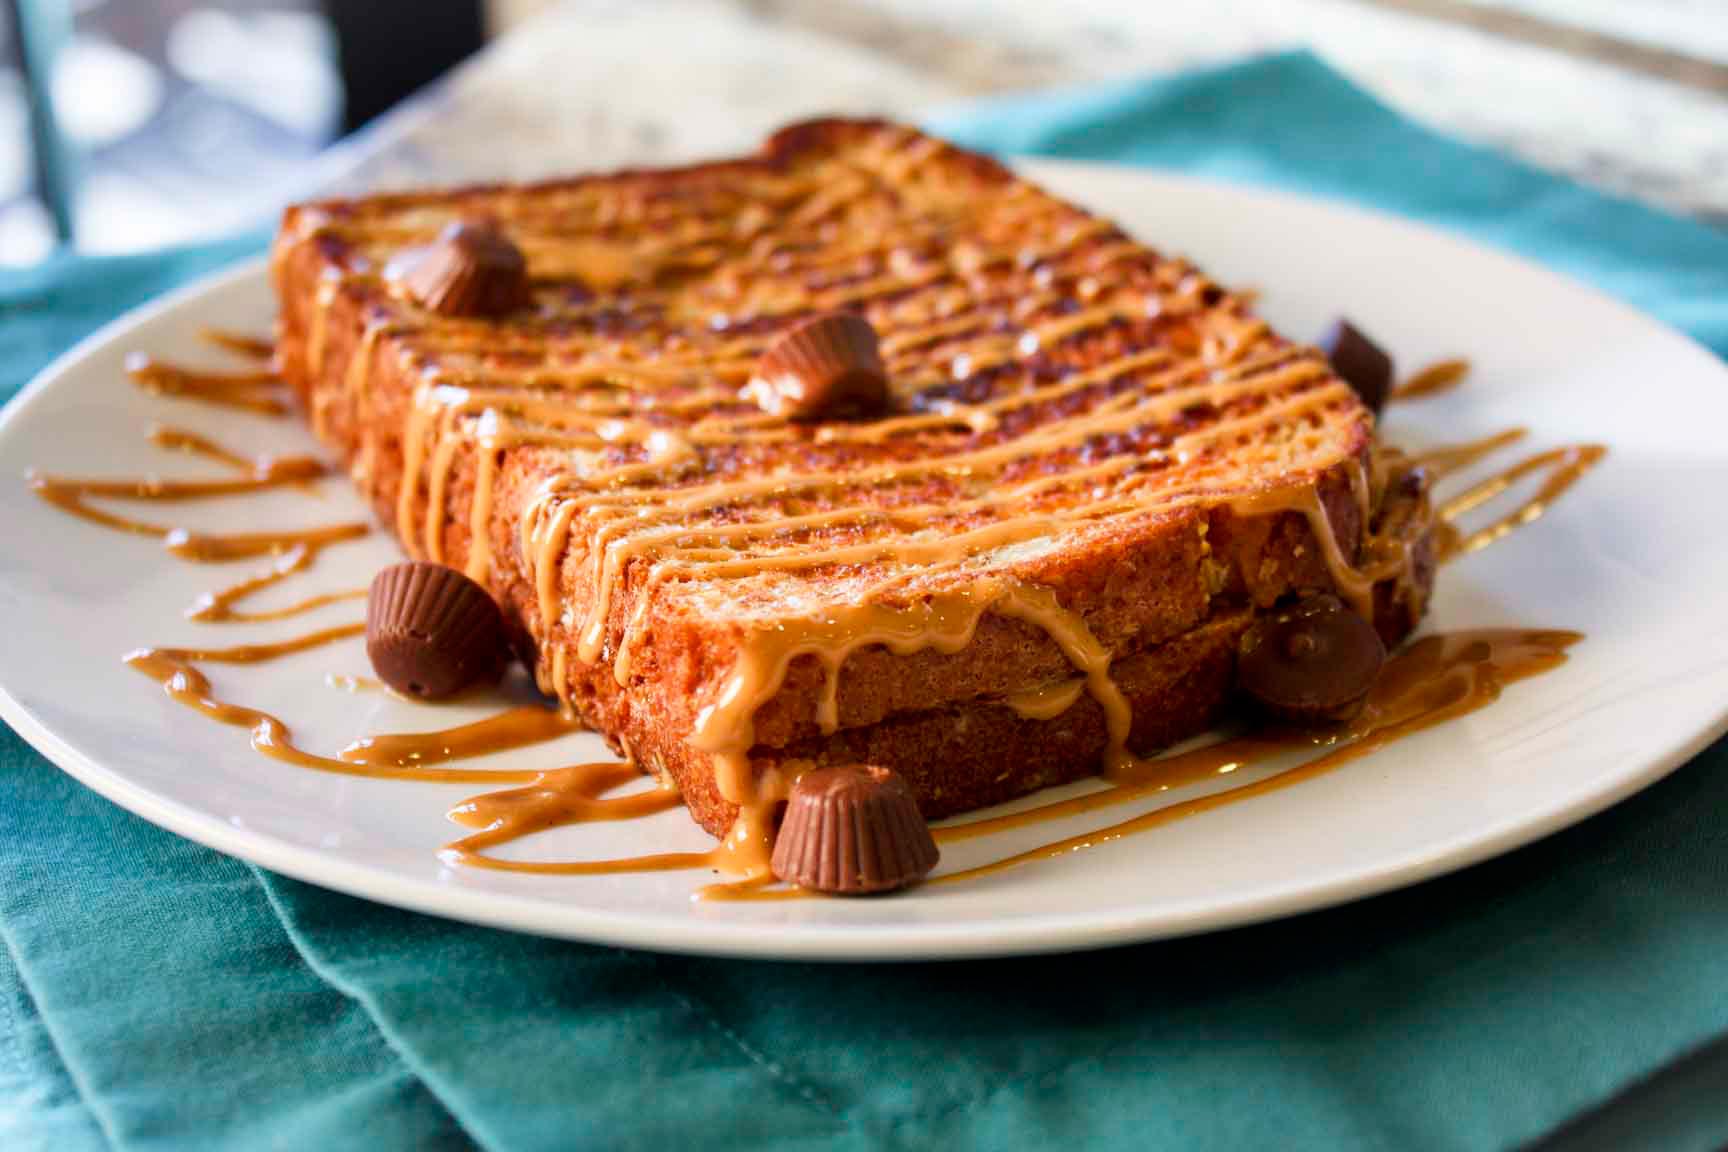 peanut-butter-french-toast-sandwich-Enjoy-Life-Its-Delicious